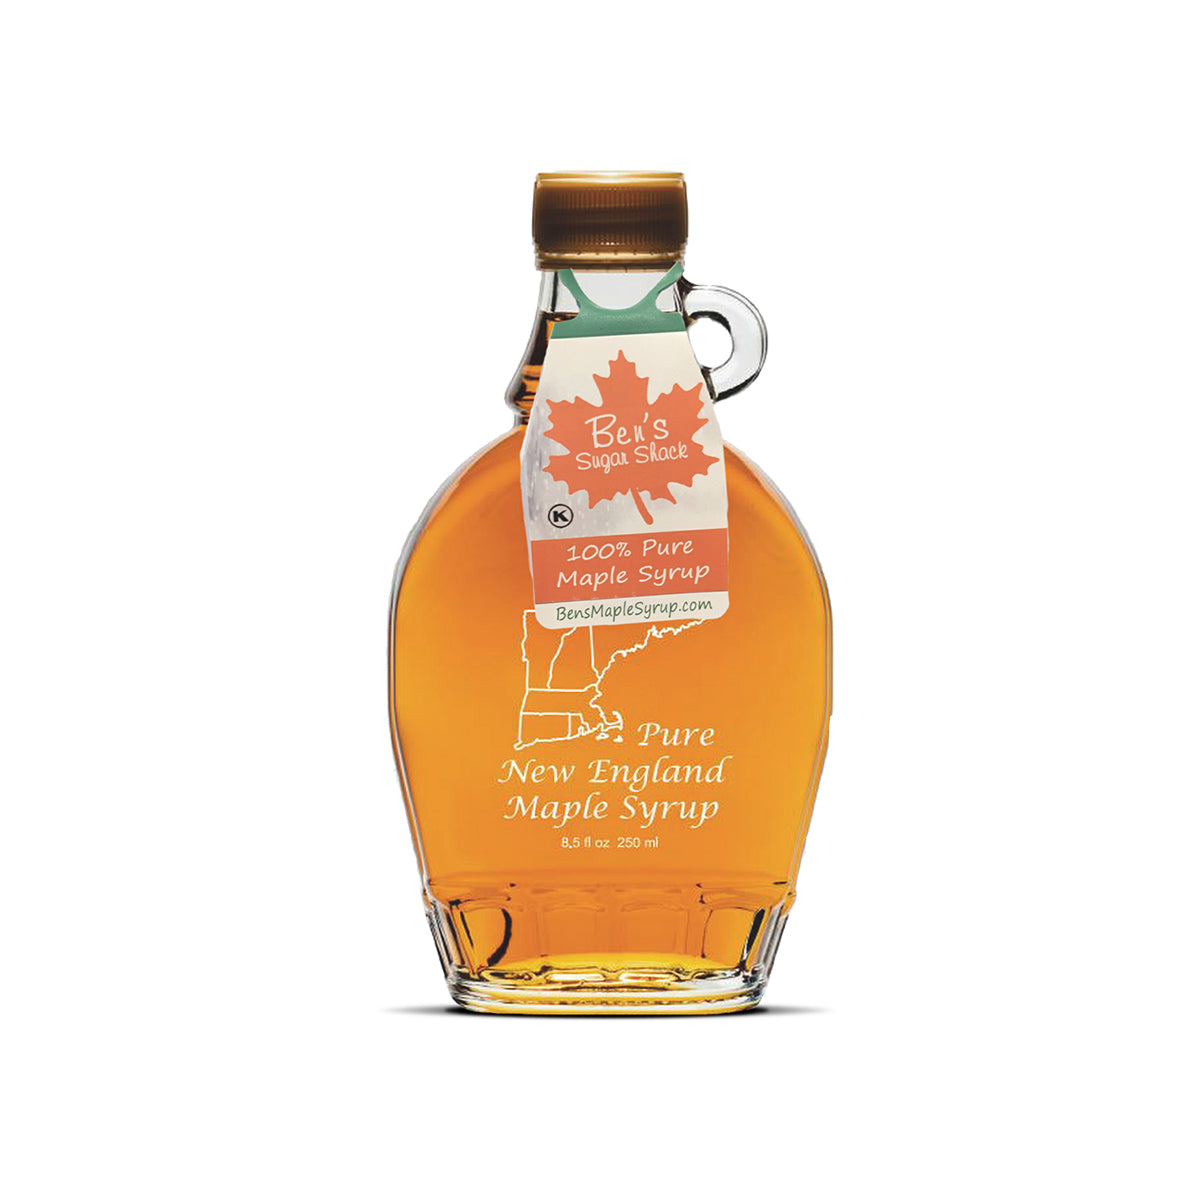 Ben's 100% Pure Maple Syrup in New England Glass Flask - 8.5 oz